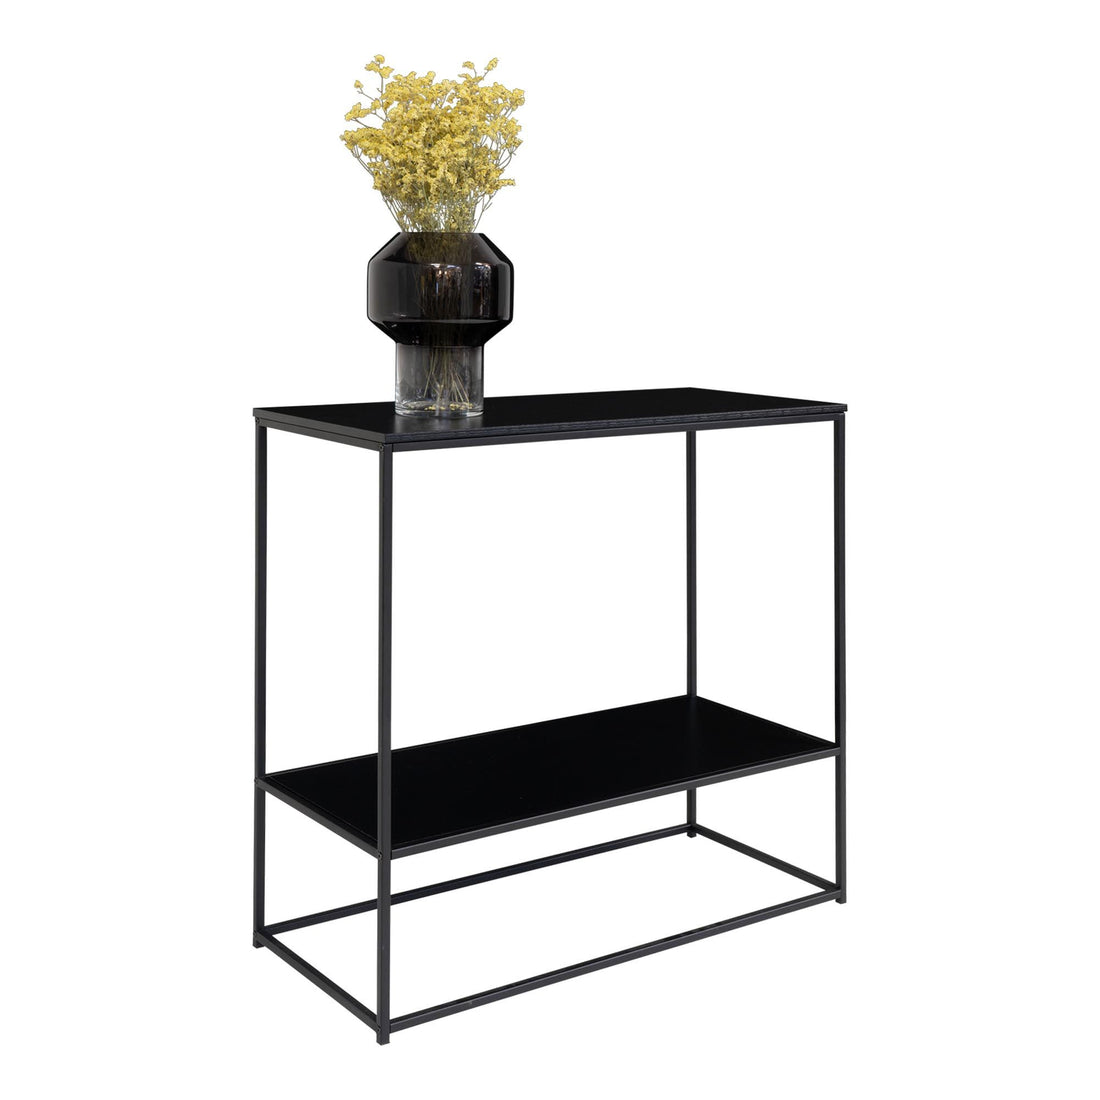 Vita console table - console table with black frame and two black shelves 80x36x80 cm - 1 - pcs